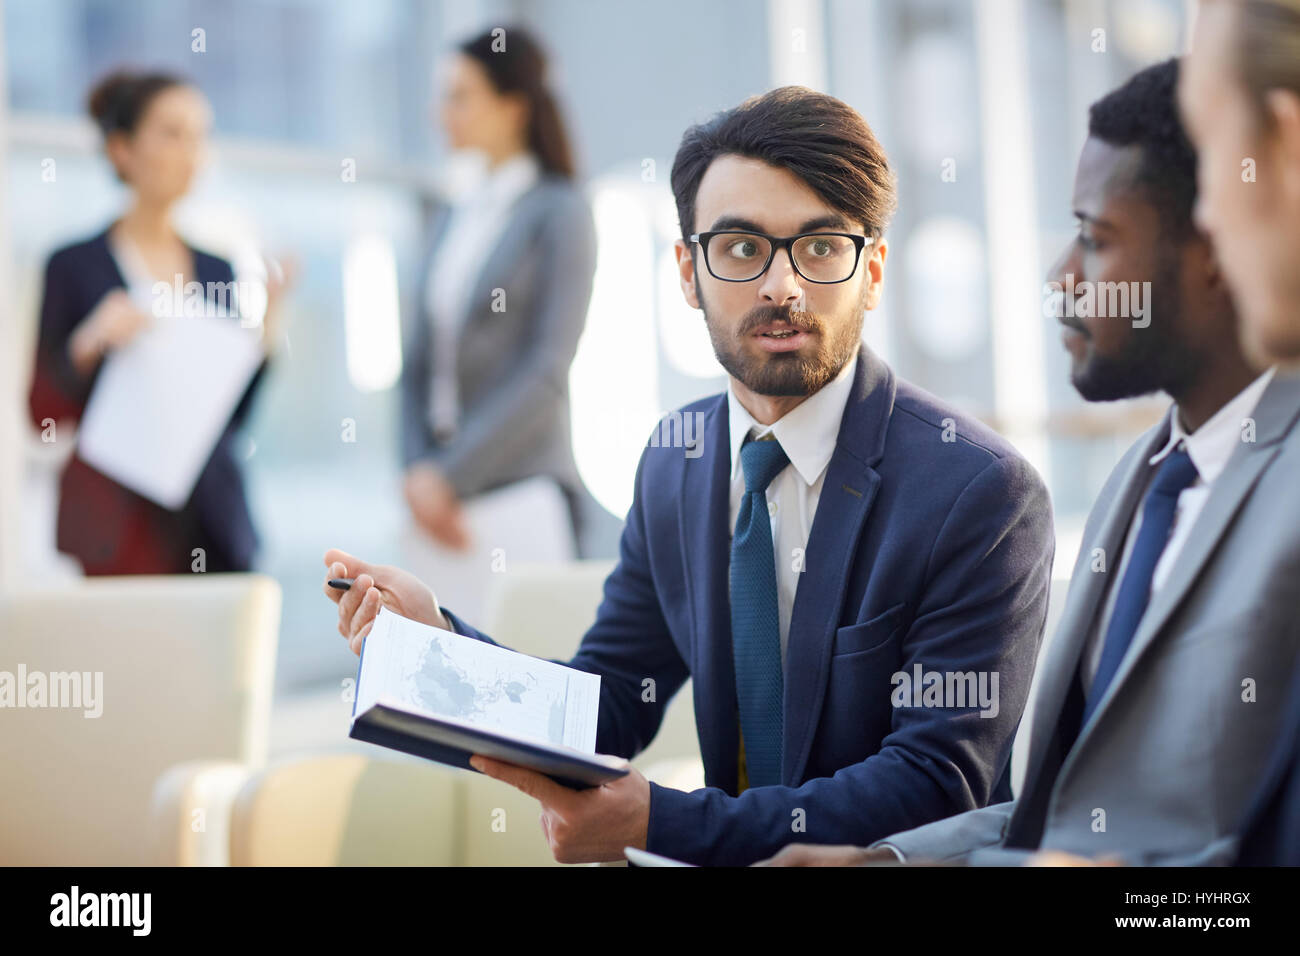 Talking to colleagues Stock Photo